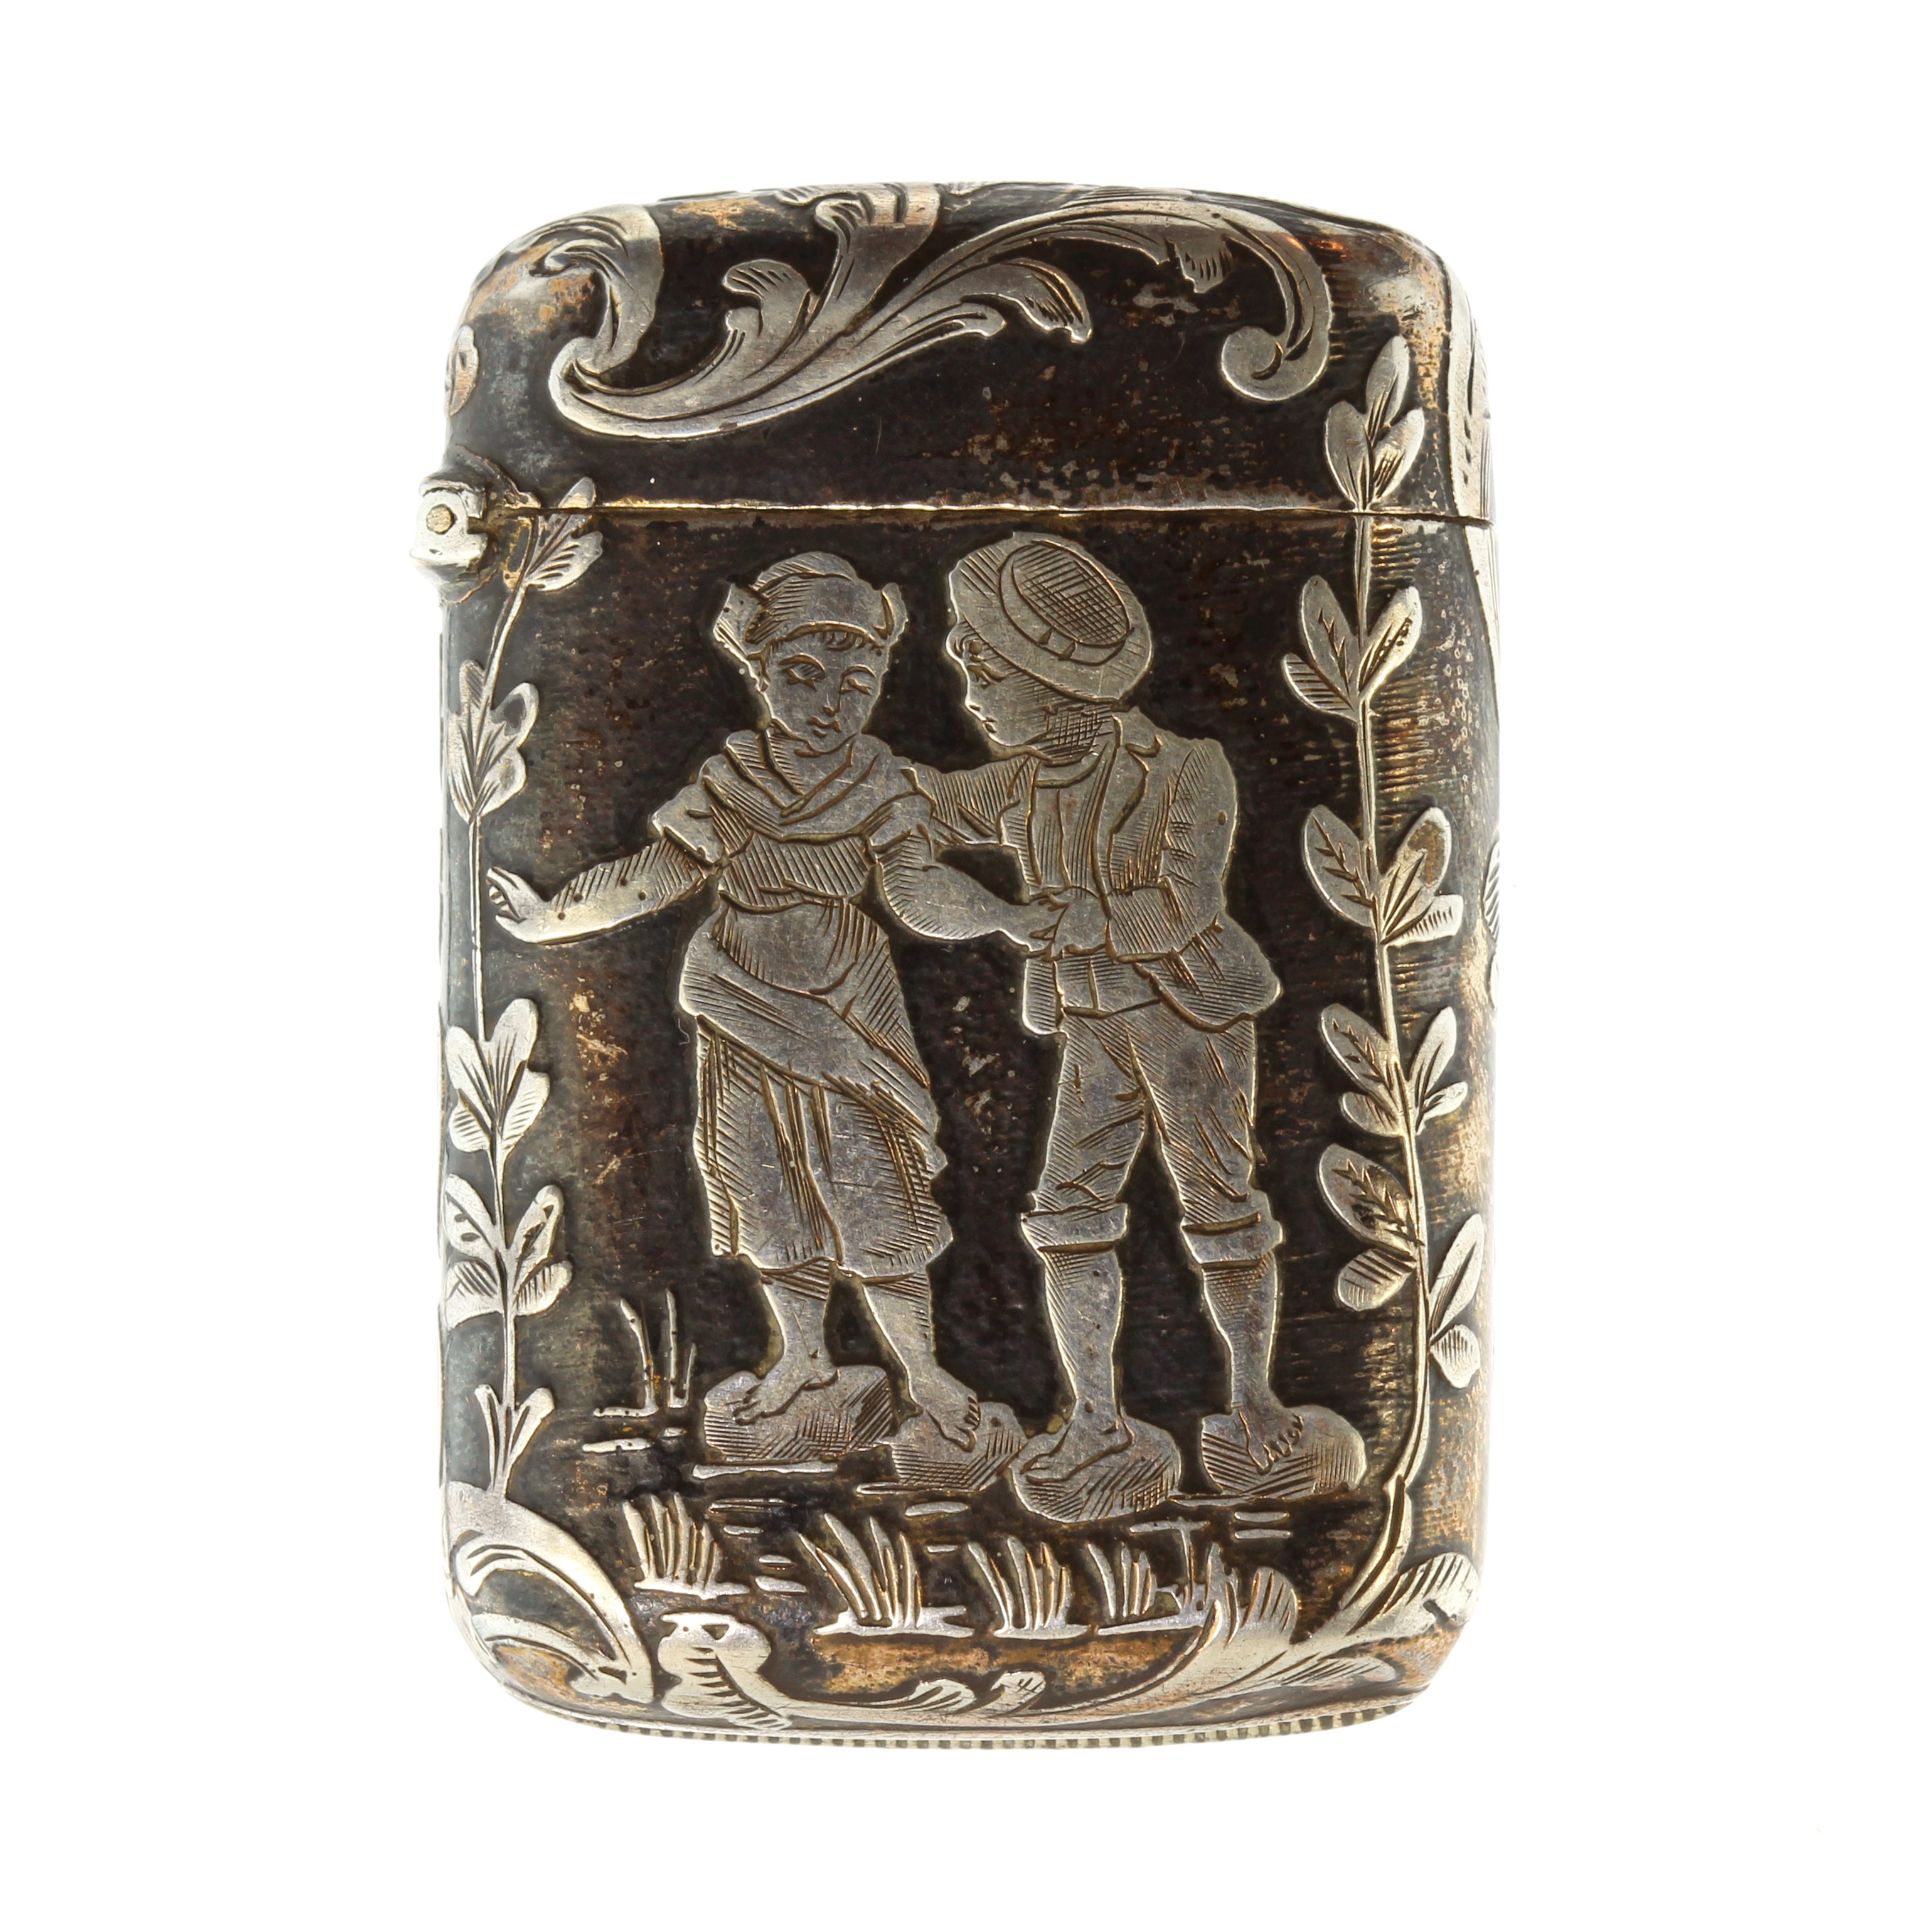 A fine antique 19th Century French silver vesta / match case of rounded rectangular form featuring